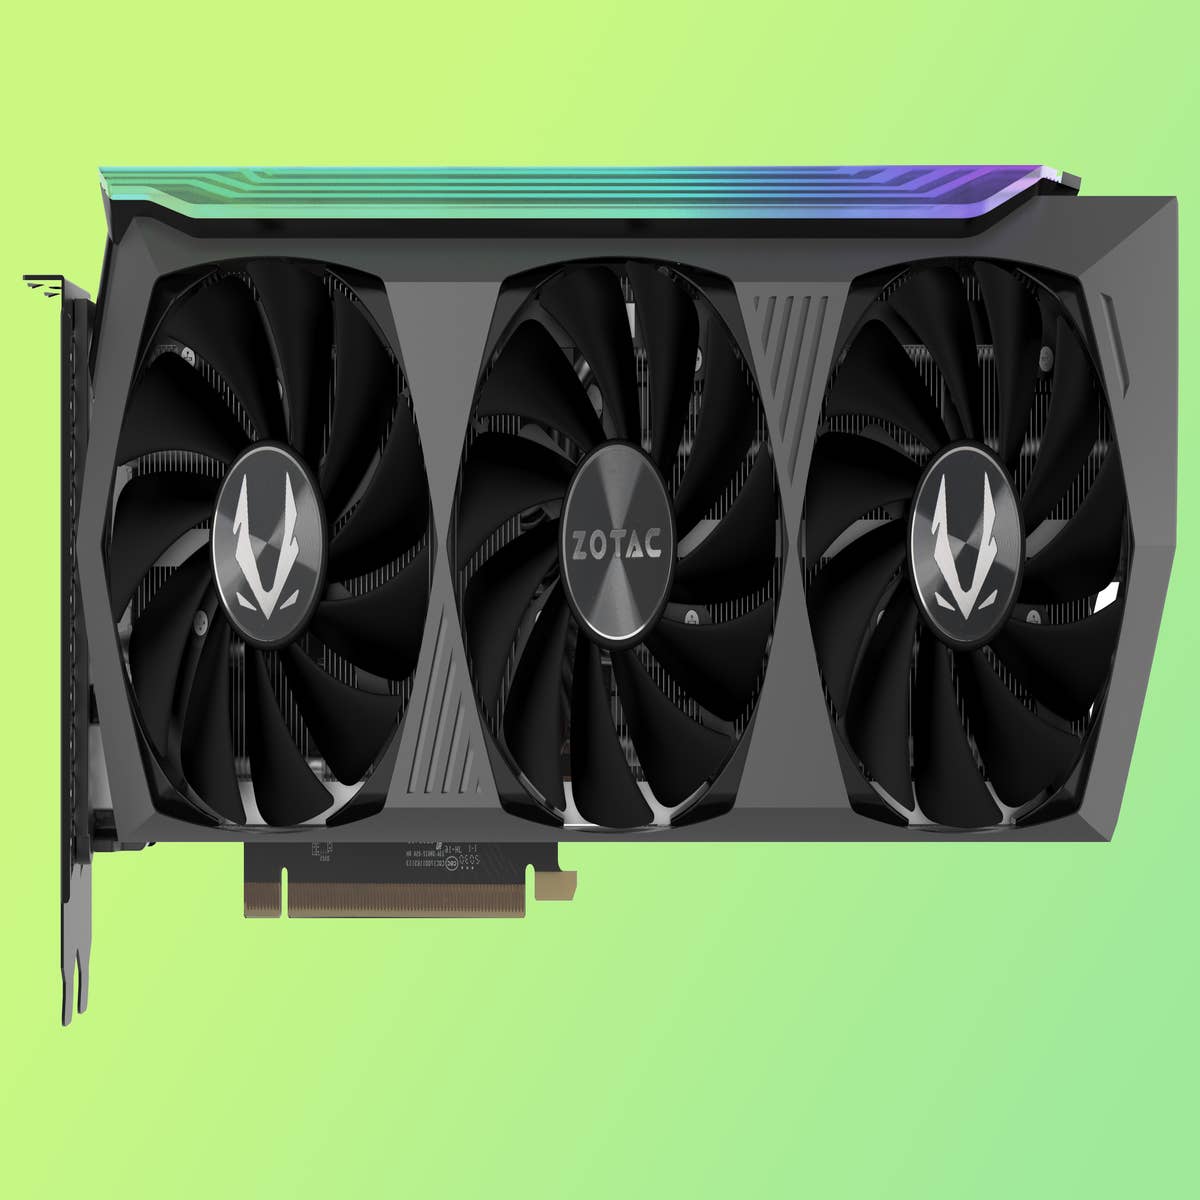 The RTX 3080 12GB is real and listed for more than the launch price of an  RTX 3090